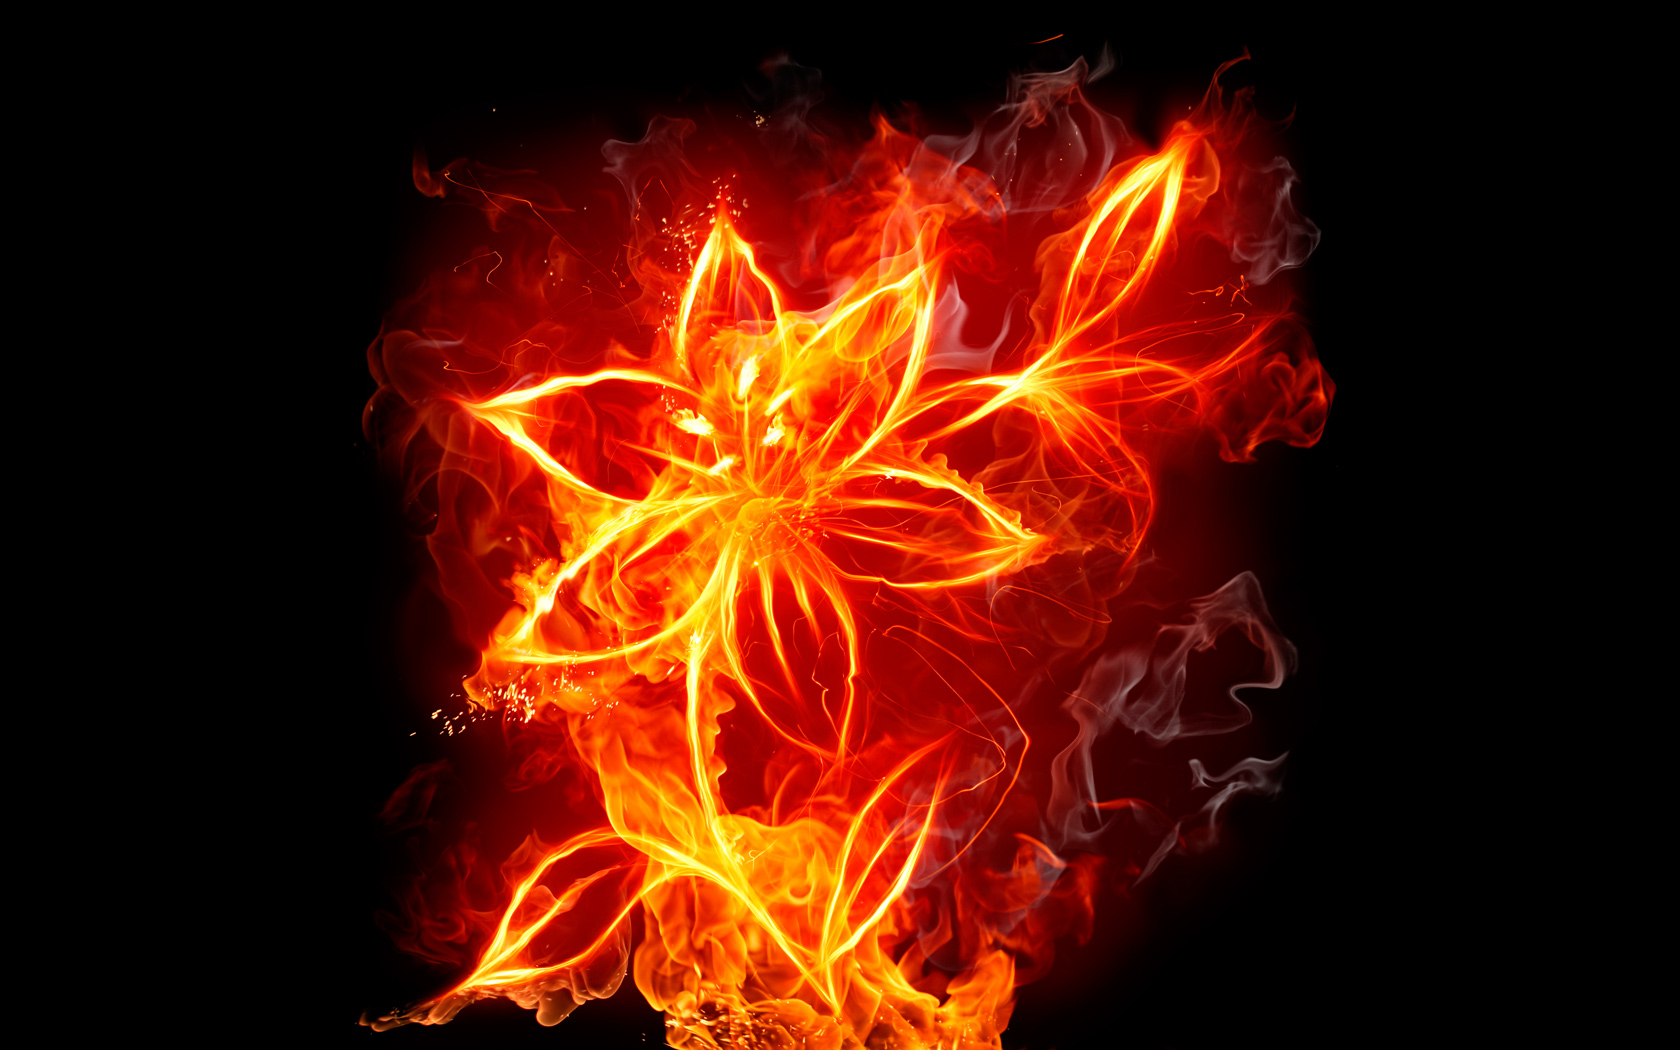 Fire Flower desktop wallpaper with vibrant colors and intricate CGI design depicting a fiery element.